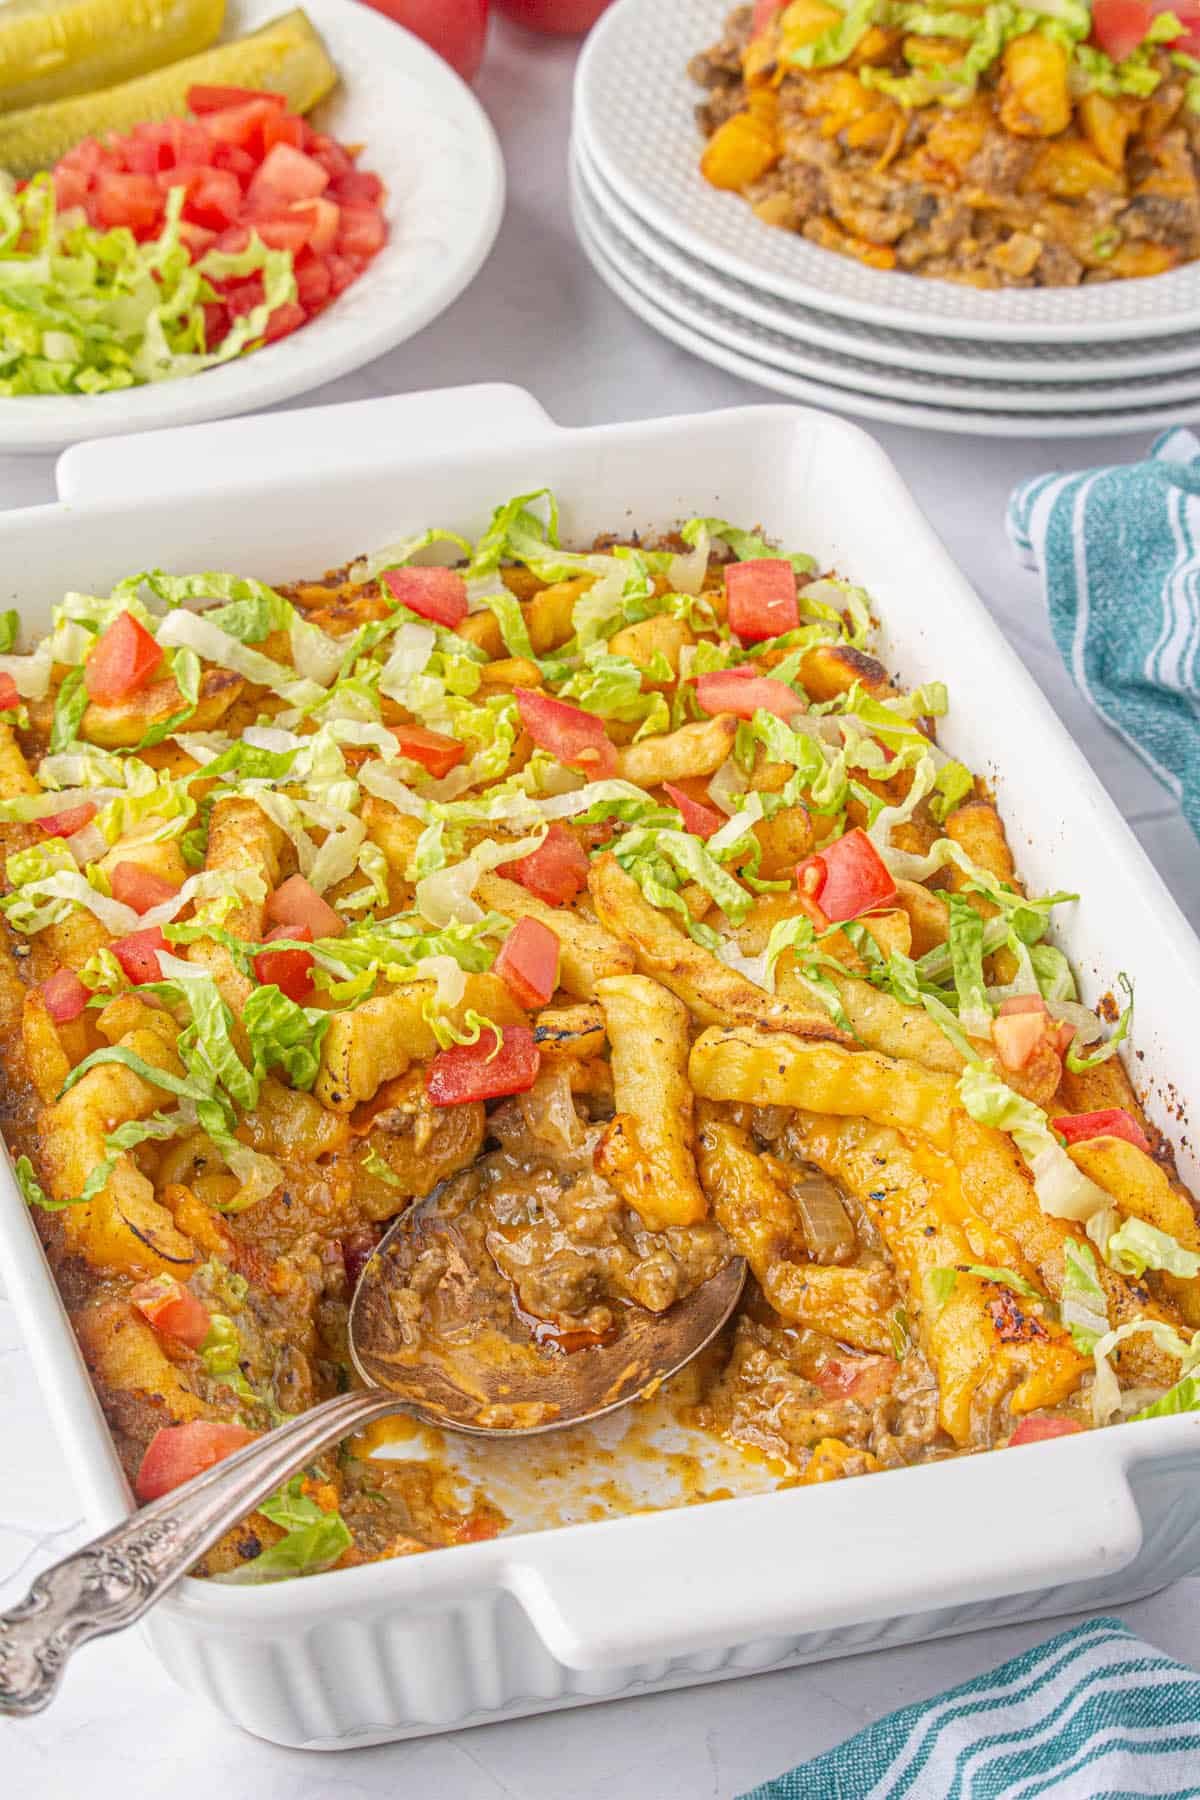 Baking dish filled with a cheeseburger french fry casserole, with a serving spoon.